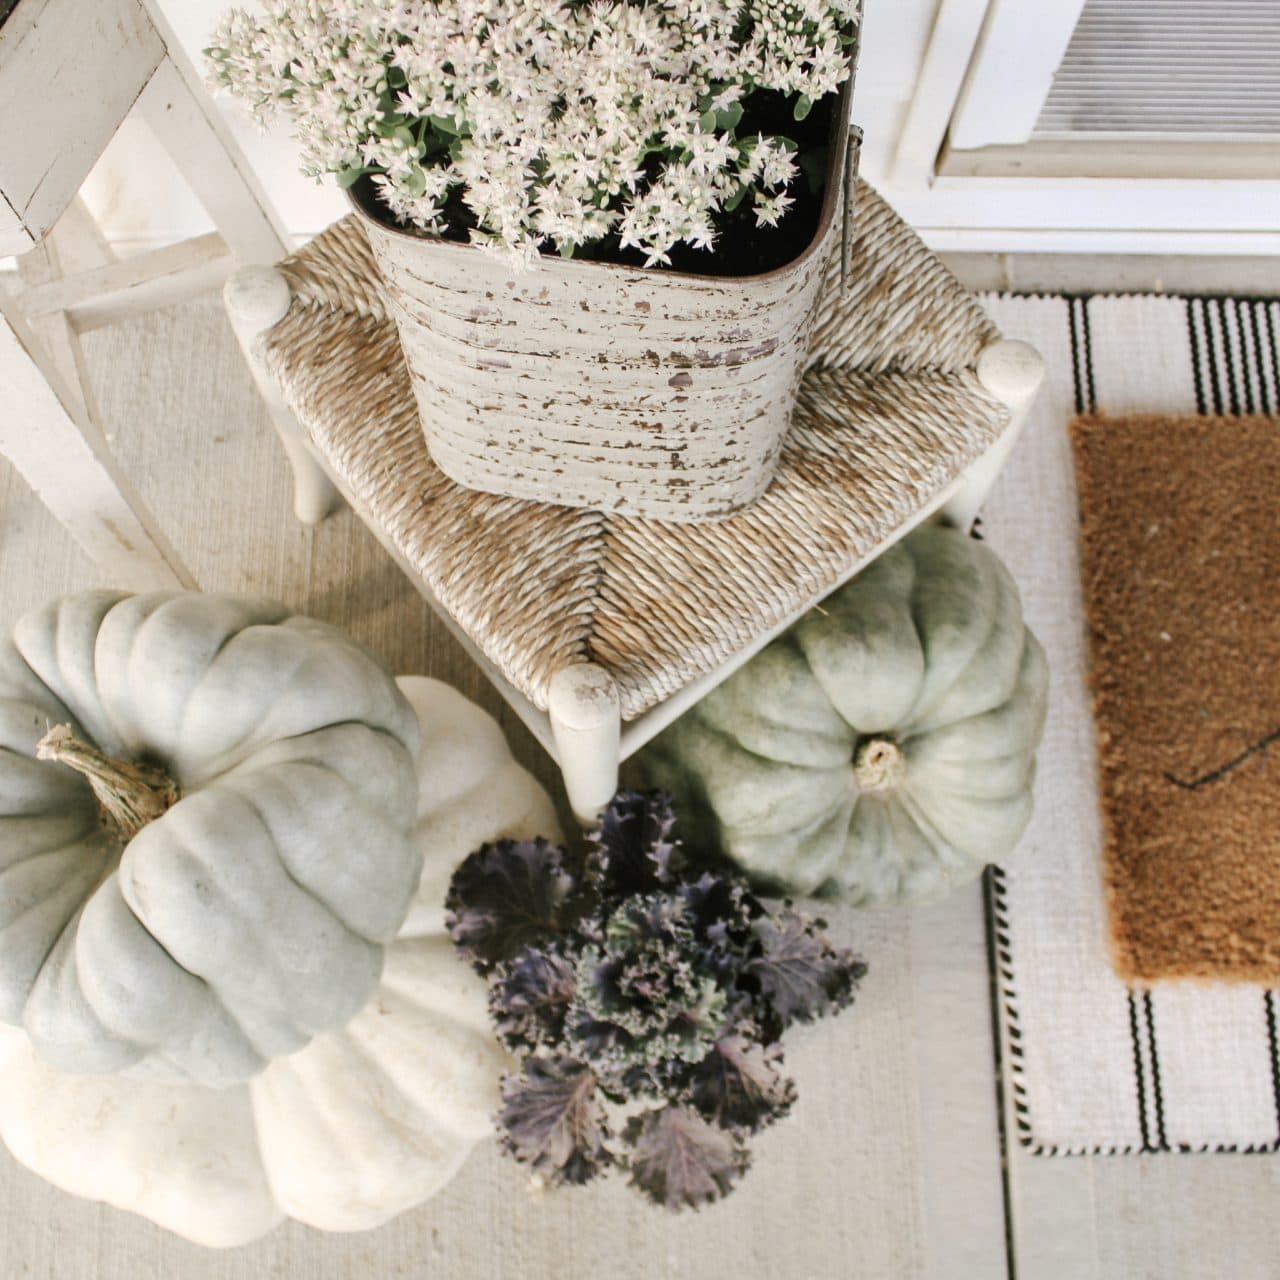 Fall Porch with Antique Accents and Muted Colors